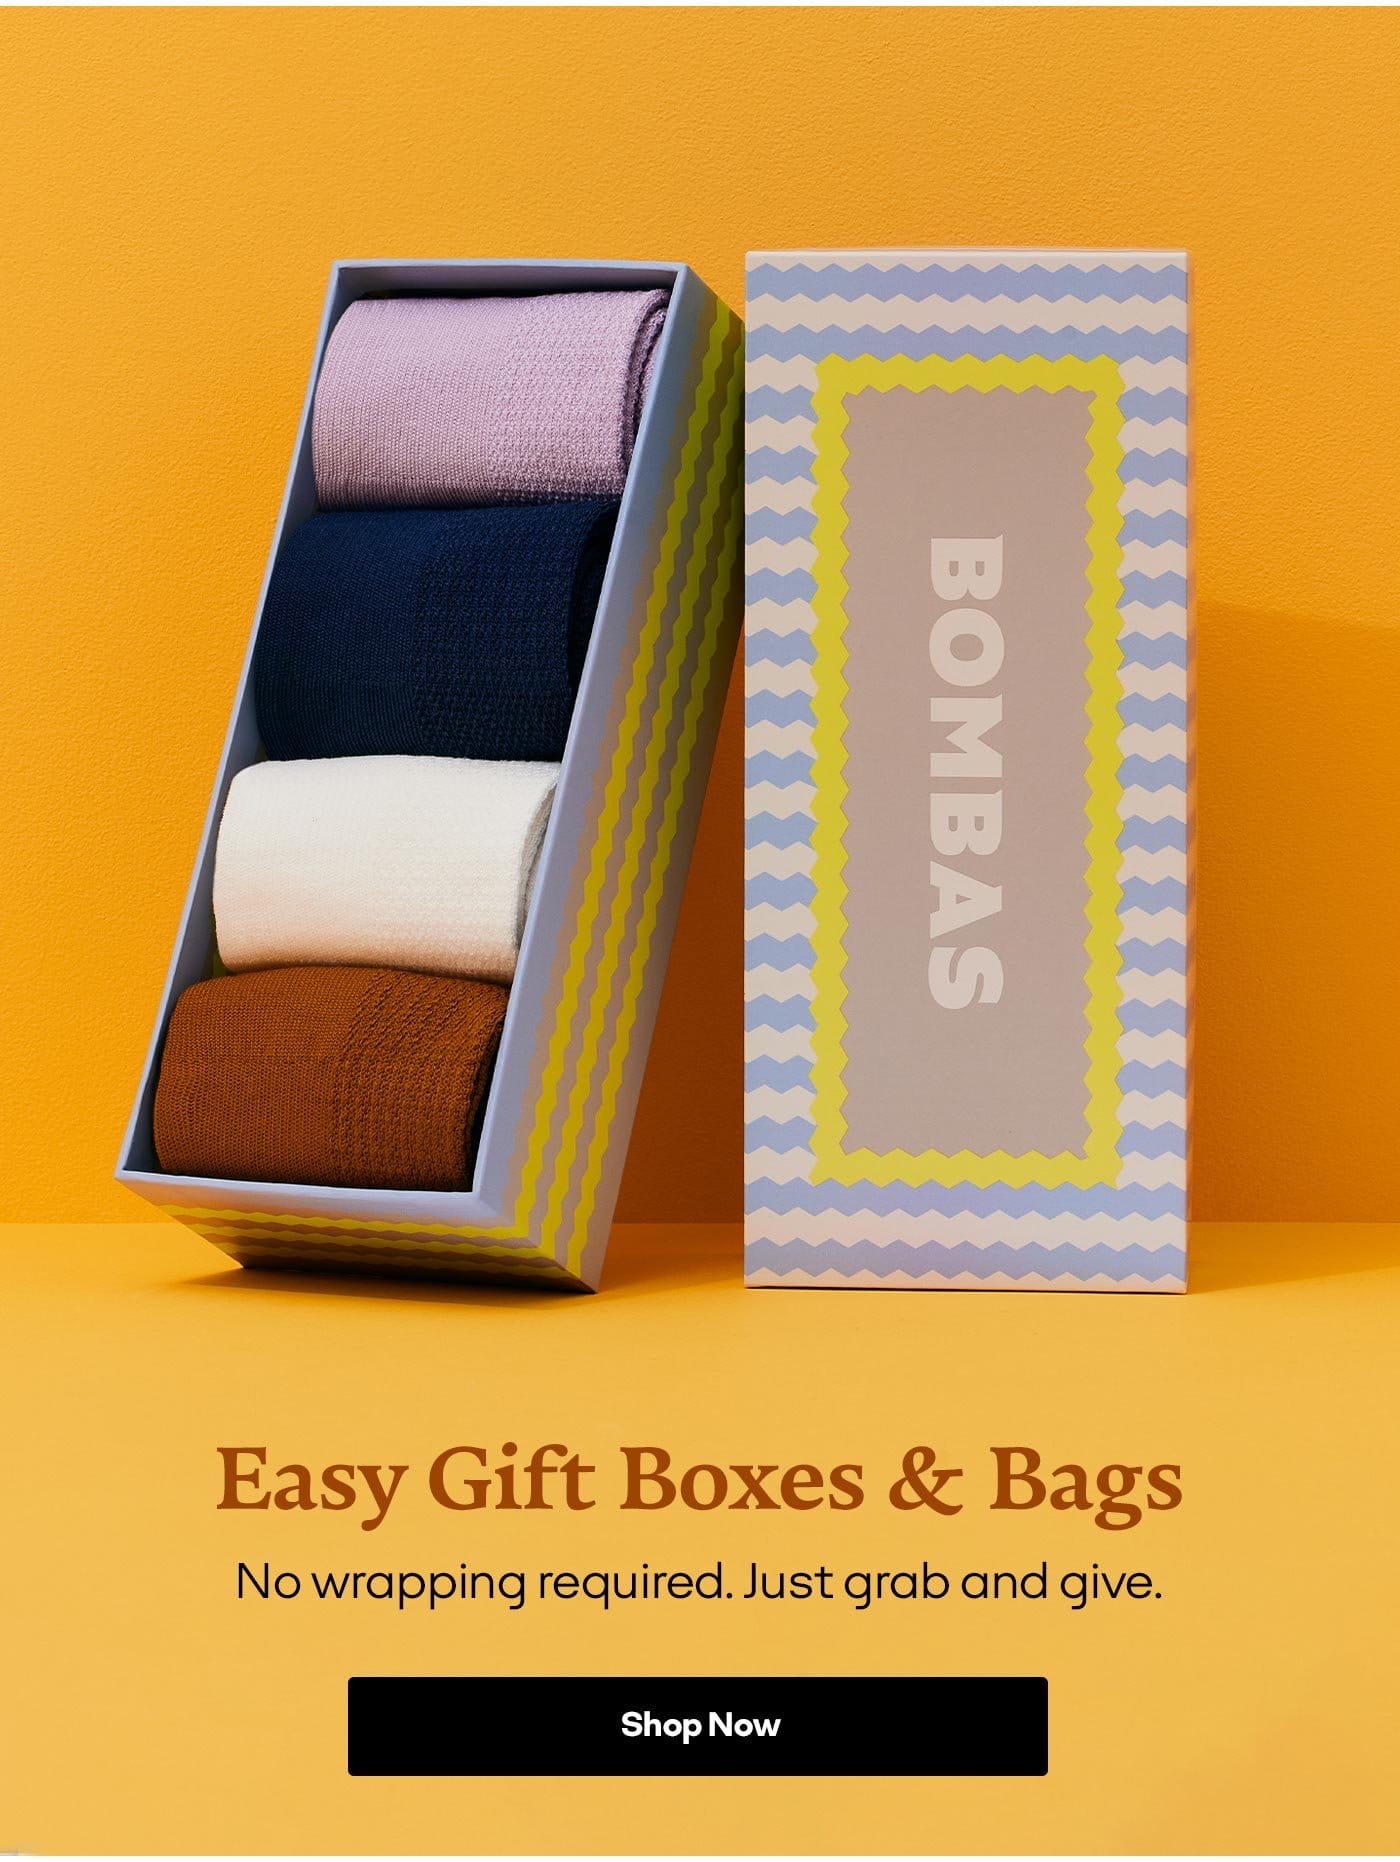 Easy Gift Boxes & Bags | No wrapping required. Just grab and give. Shop Now